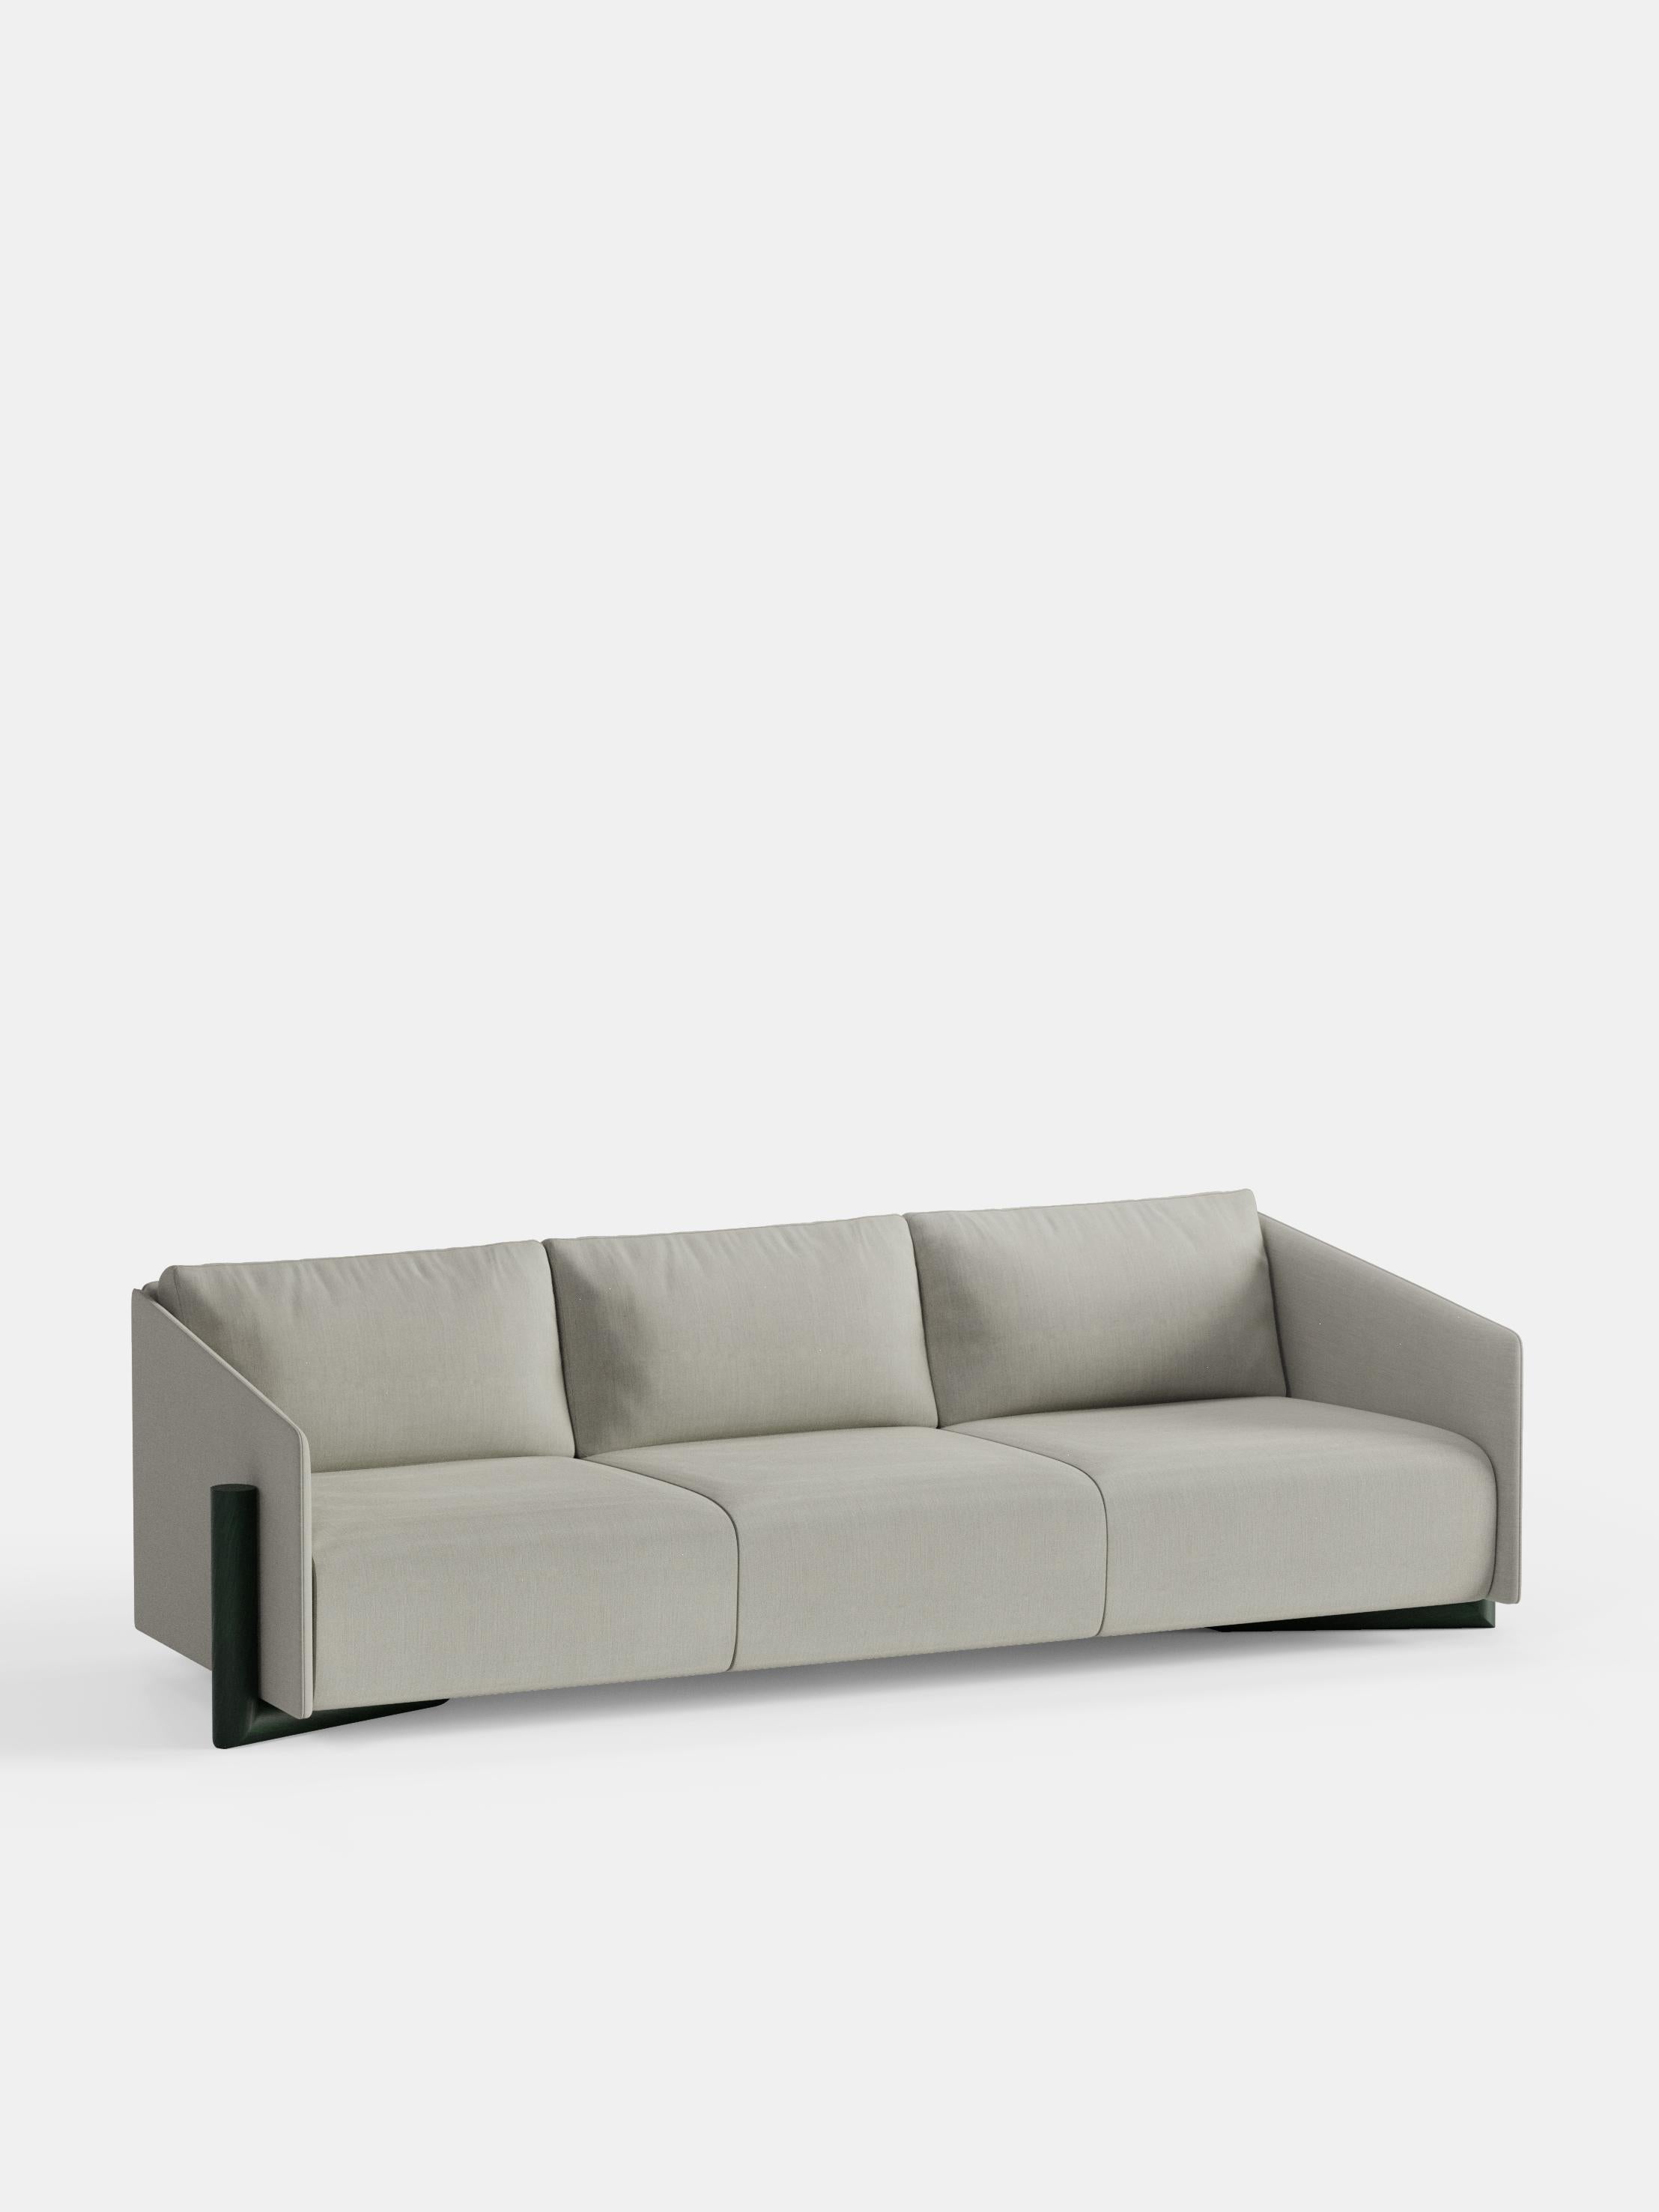 Grey Timber 4 Seater Sofa by Kann Design
Dimensions: D 104.5 x W 260 x H 75 cm.
Materials: Solid wood, elastic belts, HR foam, fabric upholstery Kvadrat Remix 126 (90% wool, 10% nylon).
Available in other fabrics.

The strong presence of textile in